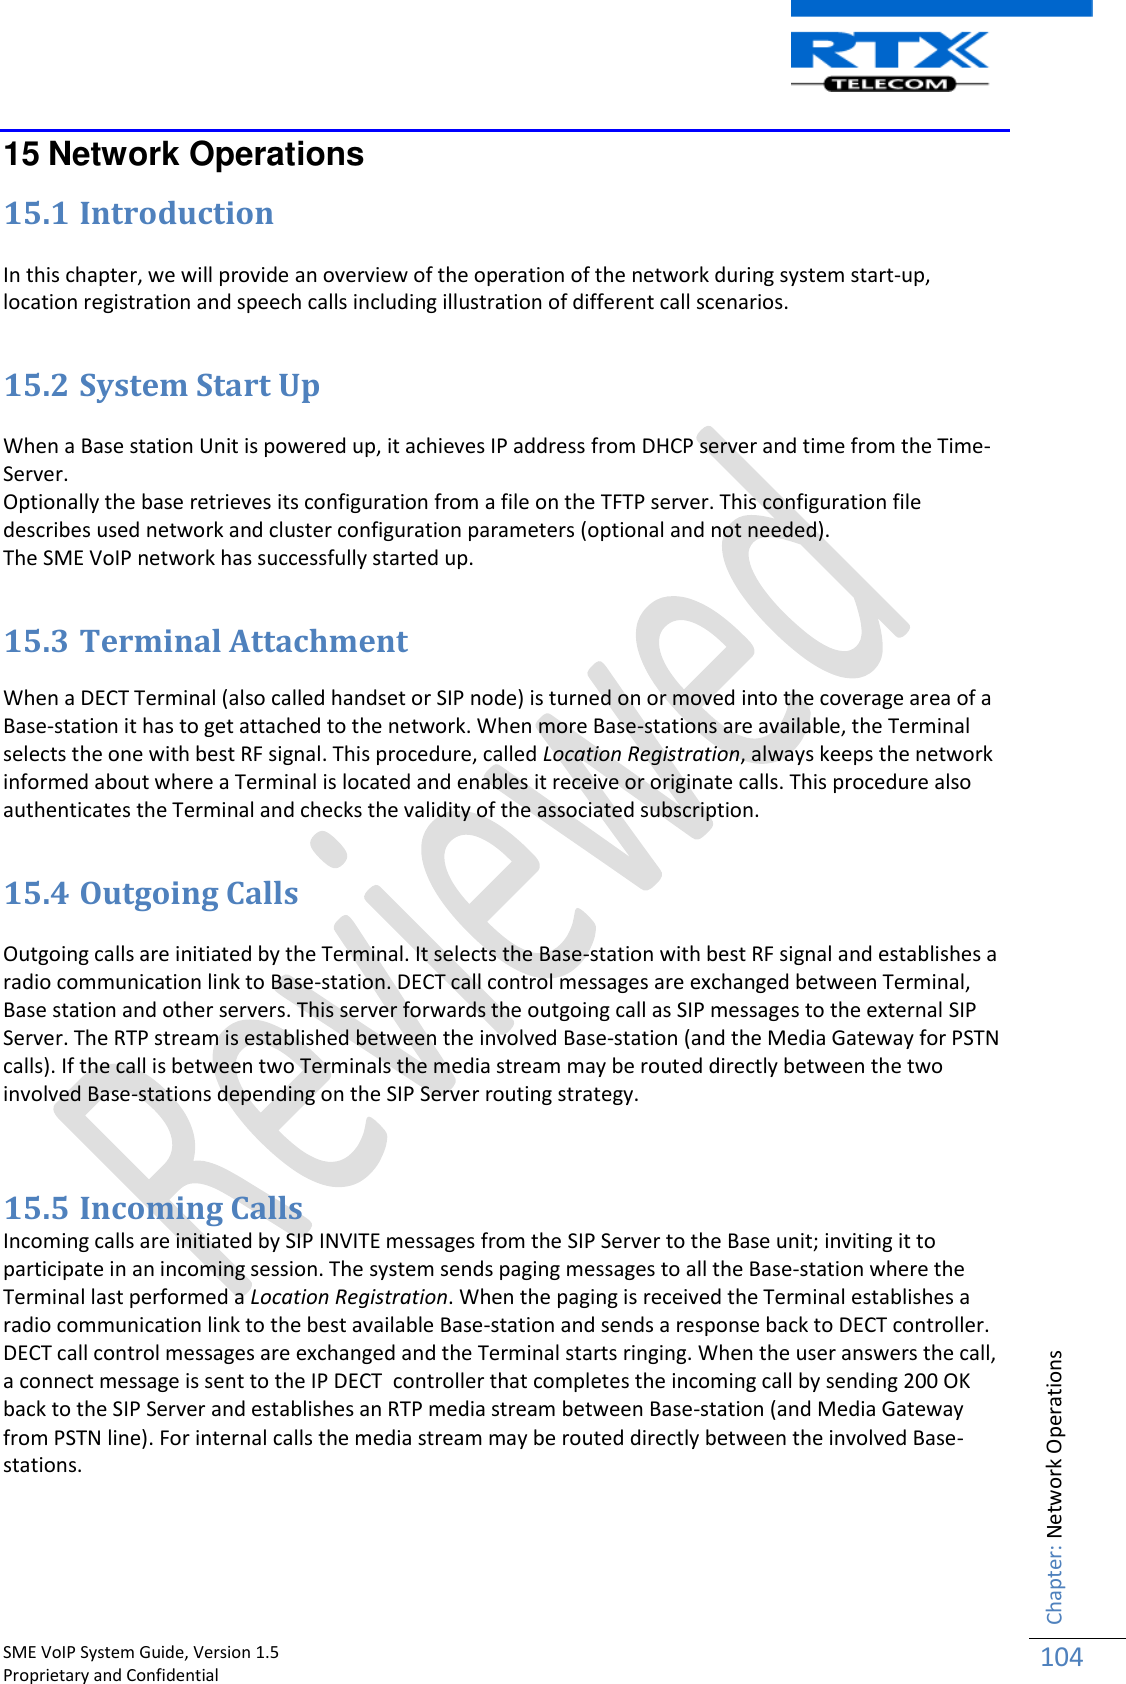    SME VoIP System Guide, Version 1.5                                                                                                                                                          Proprietary and Confidential    Chapter: Network Operations 104  15 Network Operations 15.1 Introduction  In this chapter, we will provide an overview of the operation of the network during system start-up, location registration and speech calls including illustration of different call scenarios.  15.2 System Start Up  When a Base station Unit is powered up, it achieves IP address from DHCP server and time from the Time-Server.  Optionally the base retrieves its configuration from a file on the TFTP server. This configuration file describes used network and cluster configuration parameters (optional and not needed).  The SME VoIP network has successfully started up.   15.3 Terminal Attachment  When a DECT Terminal (also called handset or SIP node) is turned on or moved into the coverage area of a Base-station it has to get attached to the network. When more Base-stations are available, the Terminal selects the one with best RF signal. This procedure, called Location Registration, always keeps the network informed about where a Terminal is located and enables it receive or originate calls. This procedure also authenticates the Terminal and checks the validity of the associated subscription.    15.4 Outgoing Calls  Outgoing calls are initiated by the Terminal. It selects the Base-station with best RF signal and establishes a radio communication link to Base-station. DECT call control messages are exchanged between Terminal, Base station and other servers. This server forwards the outgoing call as SIP messages to the external SIP Server. The RTP stream is established between the involved Base-station (and the Media Gateway for PSTN calls). If the call is between two Terminals the media stream may be routed directly between the two involved Base-stations depending on the SIP Server routing strategy.   15.5 Incoming Calls Incoming calls are initiated by SIP INVITE messages from the SIP Server to the Base unit; inviting it to participate in an incoming session. The system sends paging messages to all the Base-station where the Terminal last performed a Location Registration. When the paging is received the Terminal establishes a radio communication link to the best available Base-station and sends a response back to DECT controller. DECT call control messages are exchanged and the Terminal starts ringing. When the user answers the call, a connect message is sent to the IP DECT  controller that completes the incoming call by sending 200 OK back to the SIP Server and establishes an RTP media stream between Base-station (and Media Gateway from PSTN line). For internal calls the media stream may be routed directly between the involved Base-stations.  